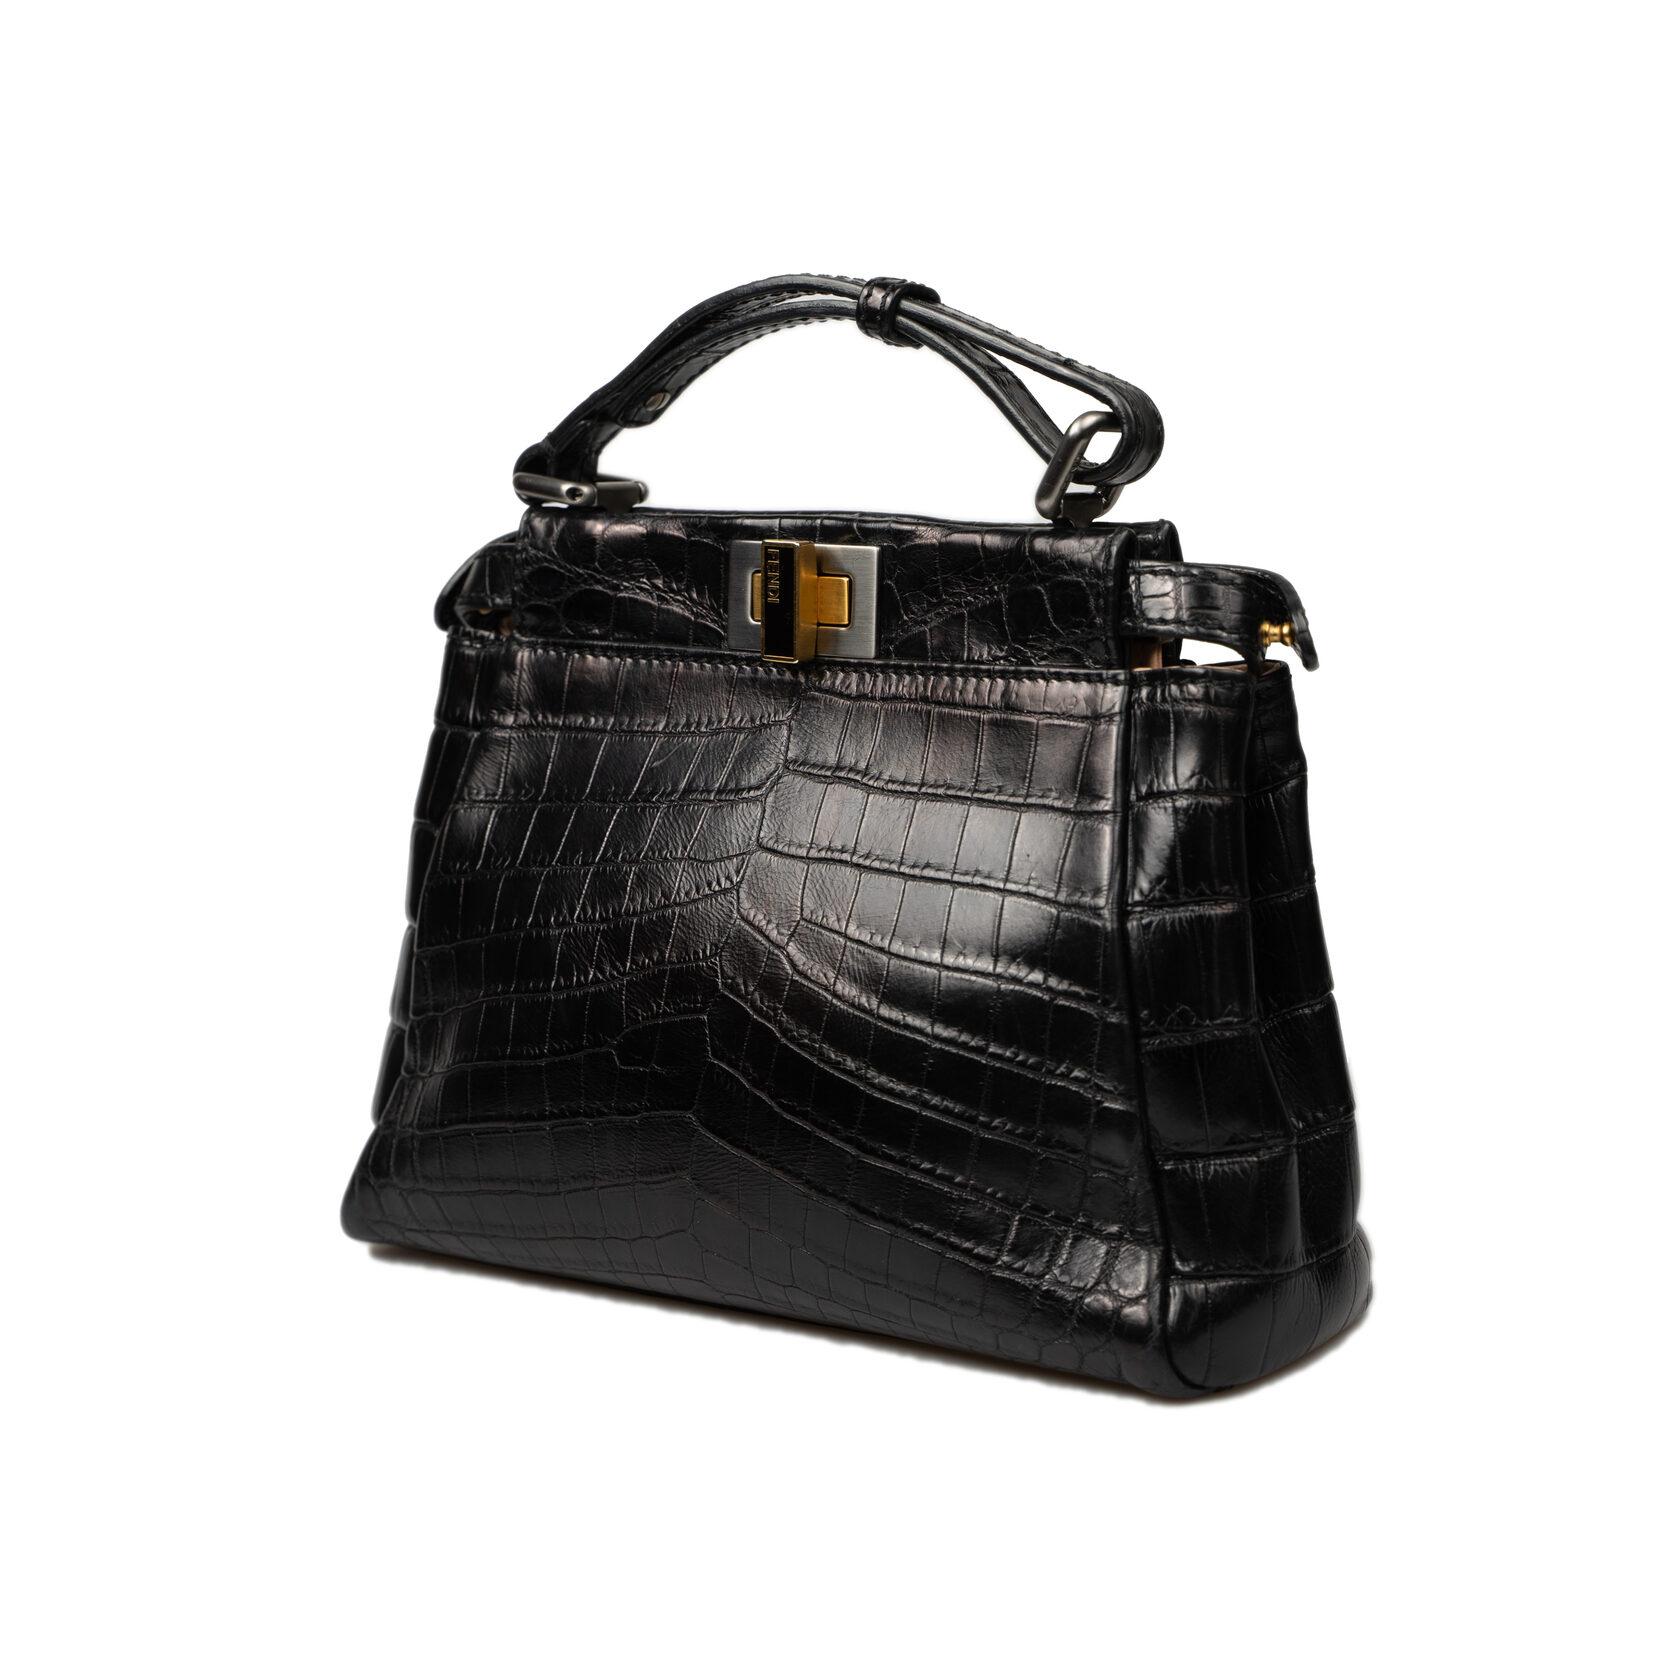 CONDITION: A: Excellent condition; carefully kept
PACKAGE: Adjustable shoulder strap
SIZE: 22/18/7 cm Adjustable shoulder strap min 101 cm - max 133 cm.
BRAND: FENDI
MODEL: Peekaboo Mini
Black color
MATERIAL: Crocodile Skin
COLOR OF INNER CONE: